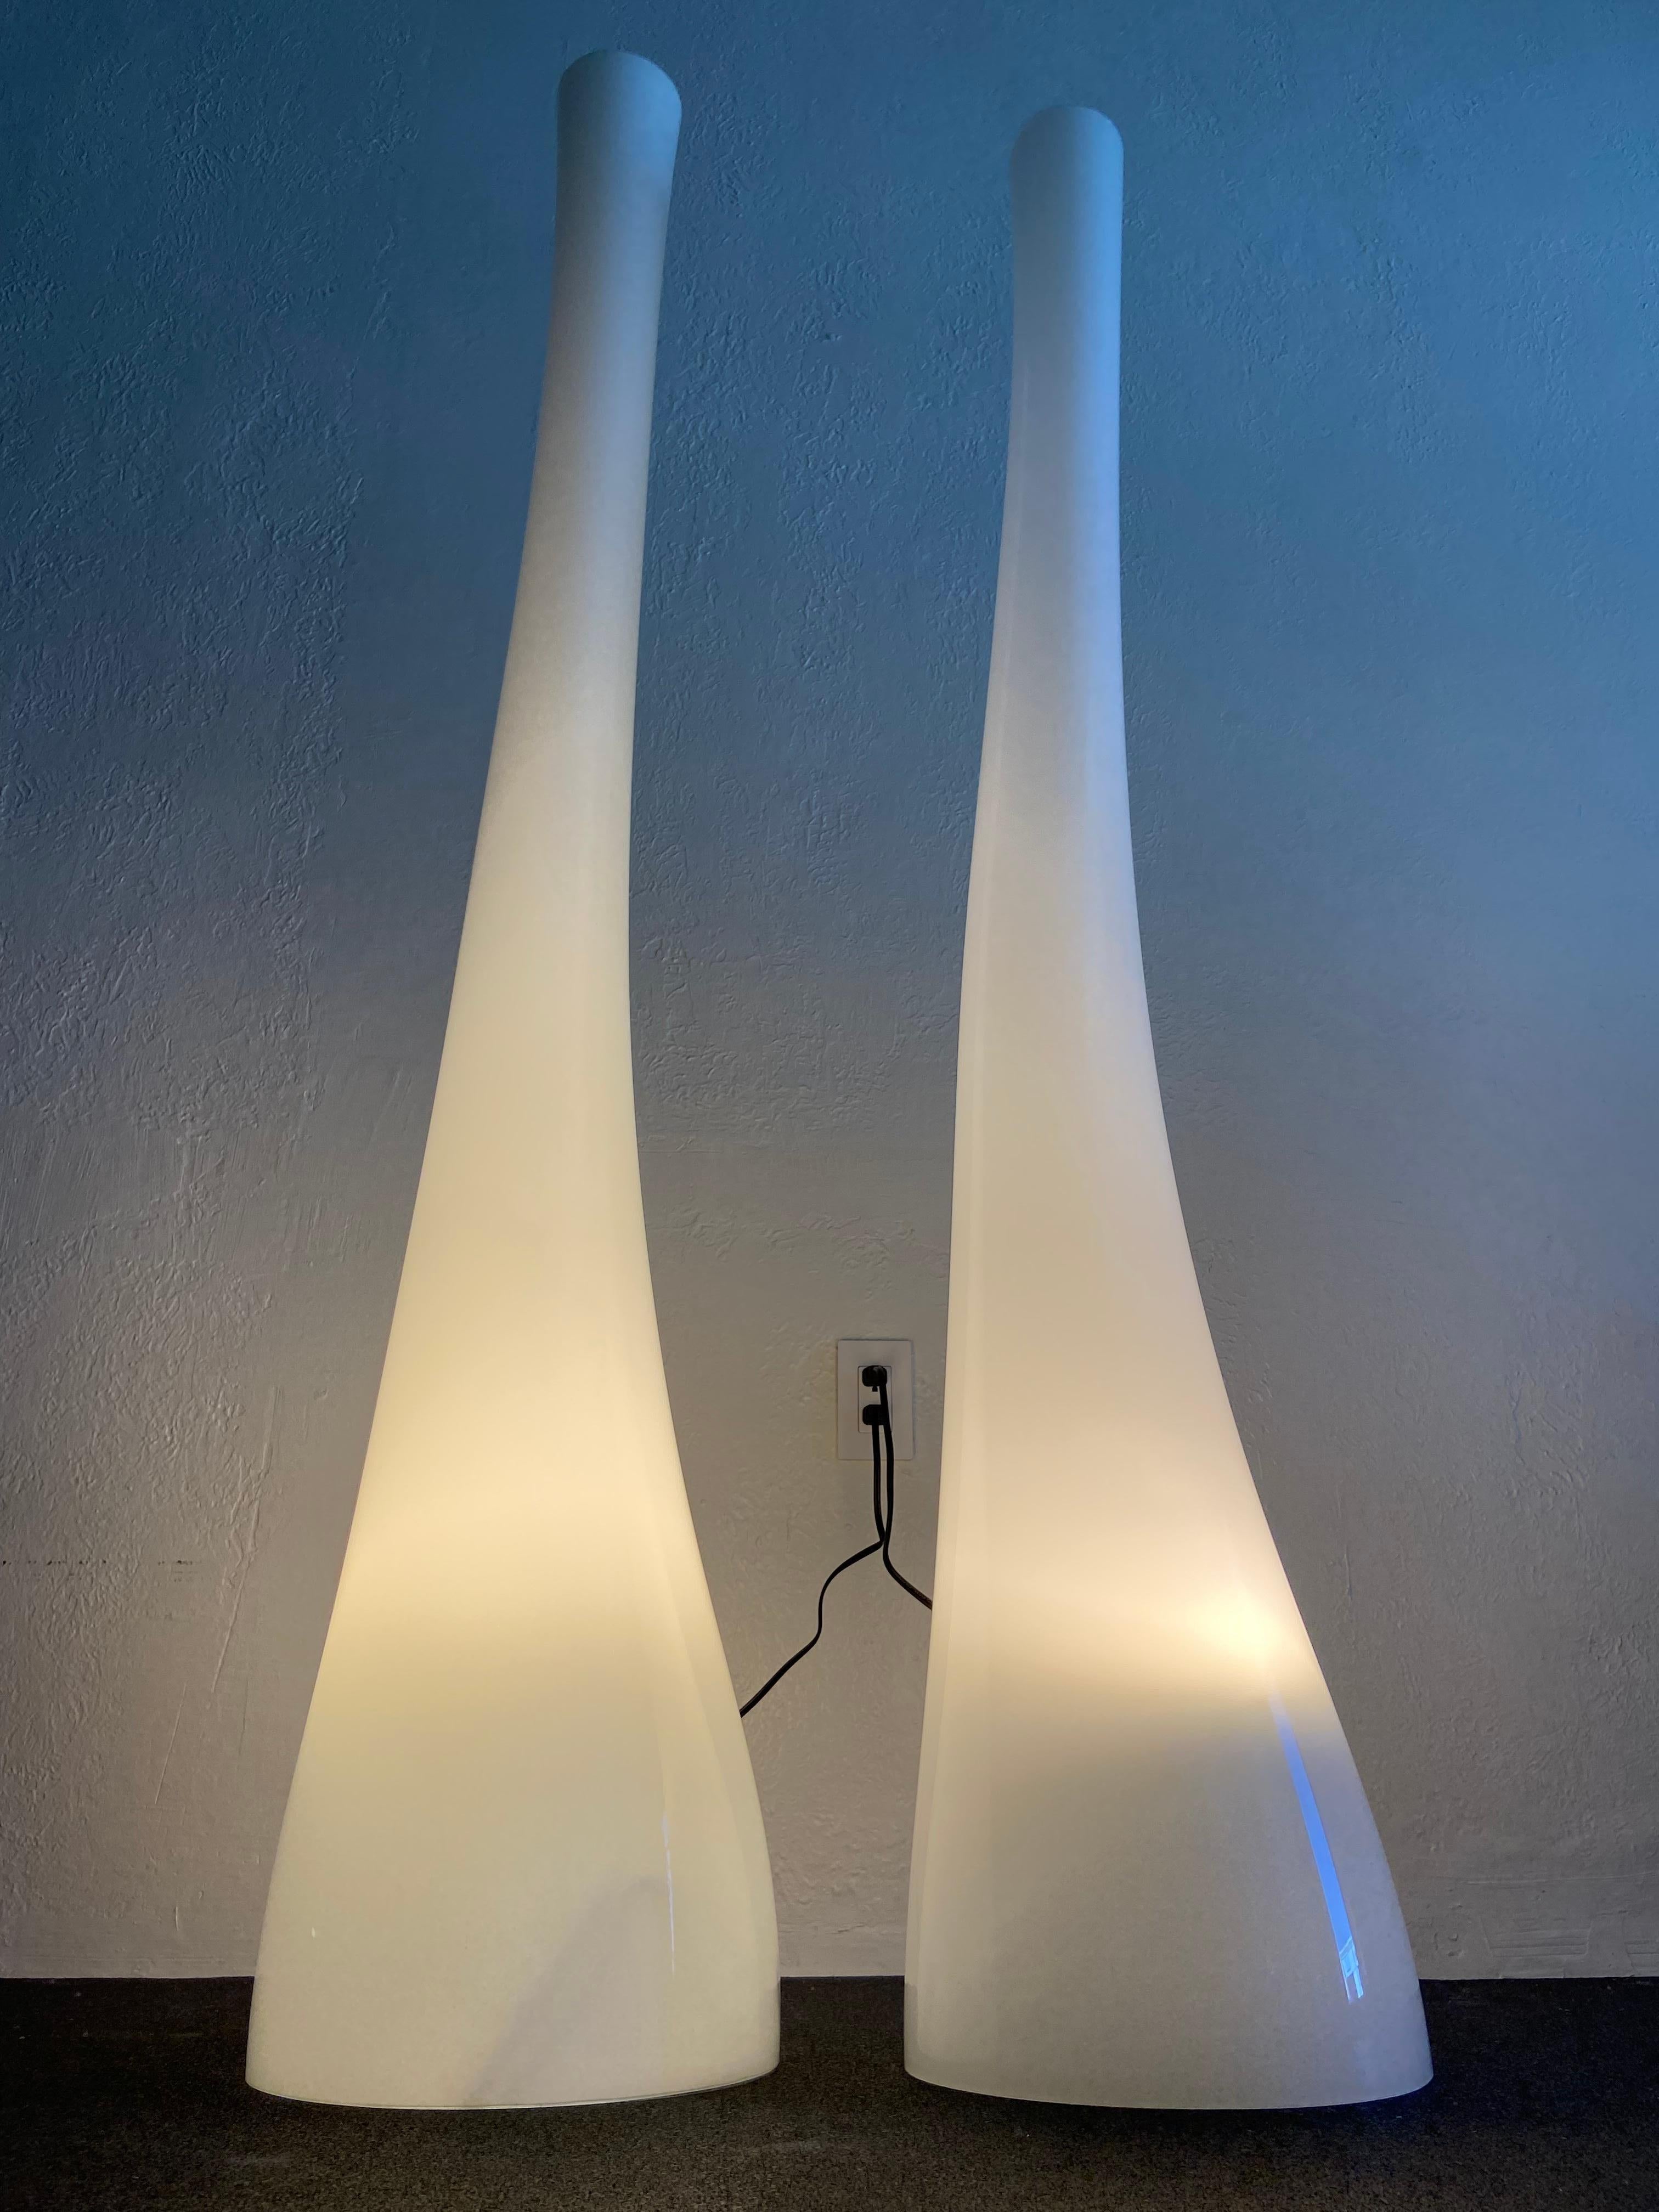 Pair of organic free-form glass floor lamps in the style of Holmegaard. Both lamps in working order with the as found original wiring. Please note that one lamp is slightly smaller. 

Larger lamp: base measures 13” across and stands 65”